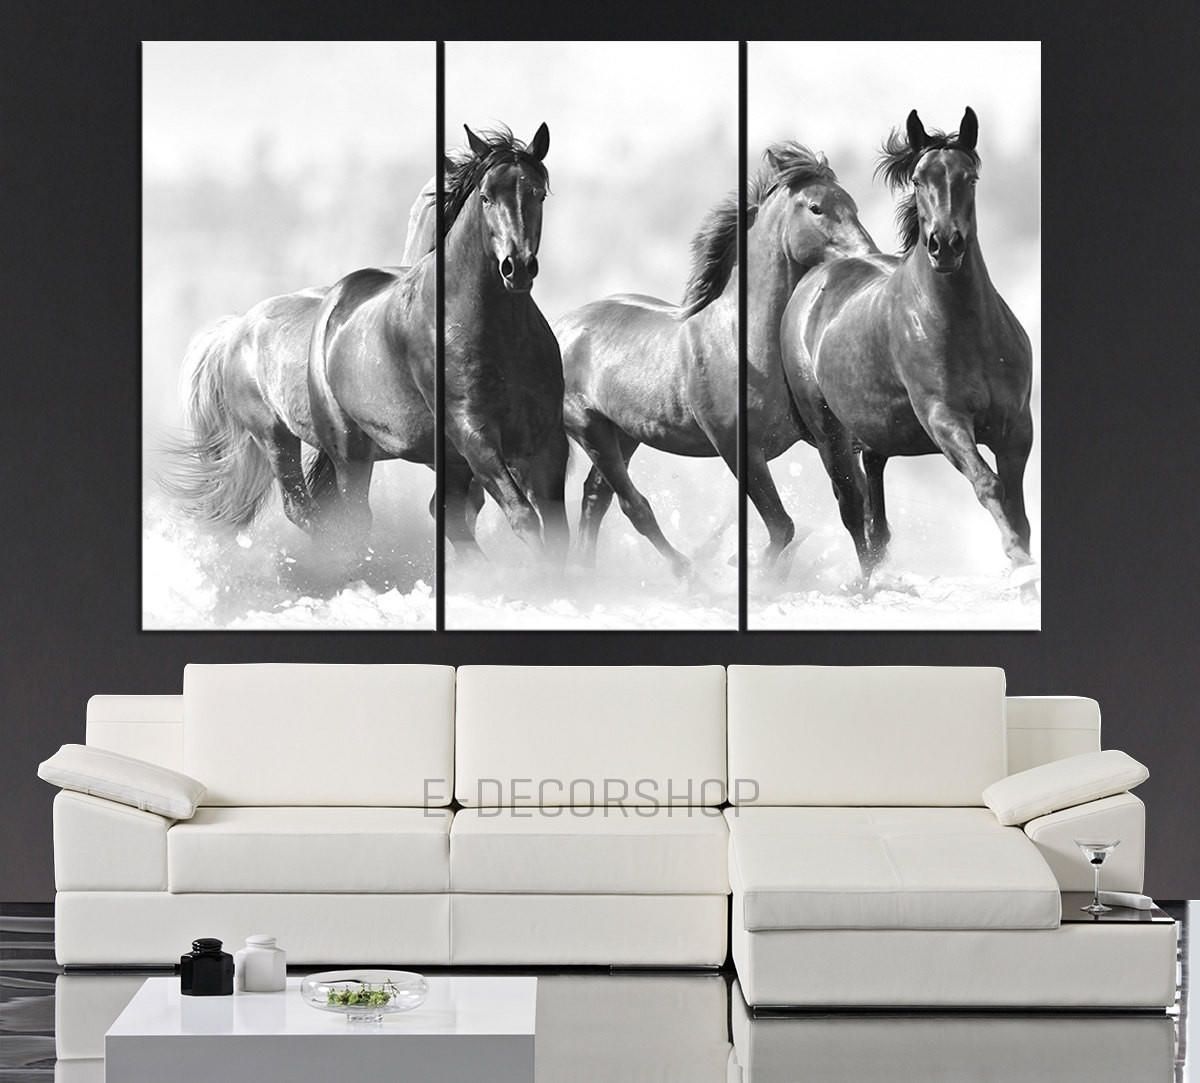 Large Wall Art Running Wild Horses Canvas From Mycanvasprint Pertaining To Horses Wall Art (View 17 of 20)